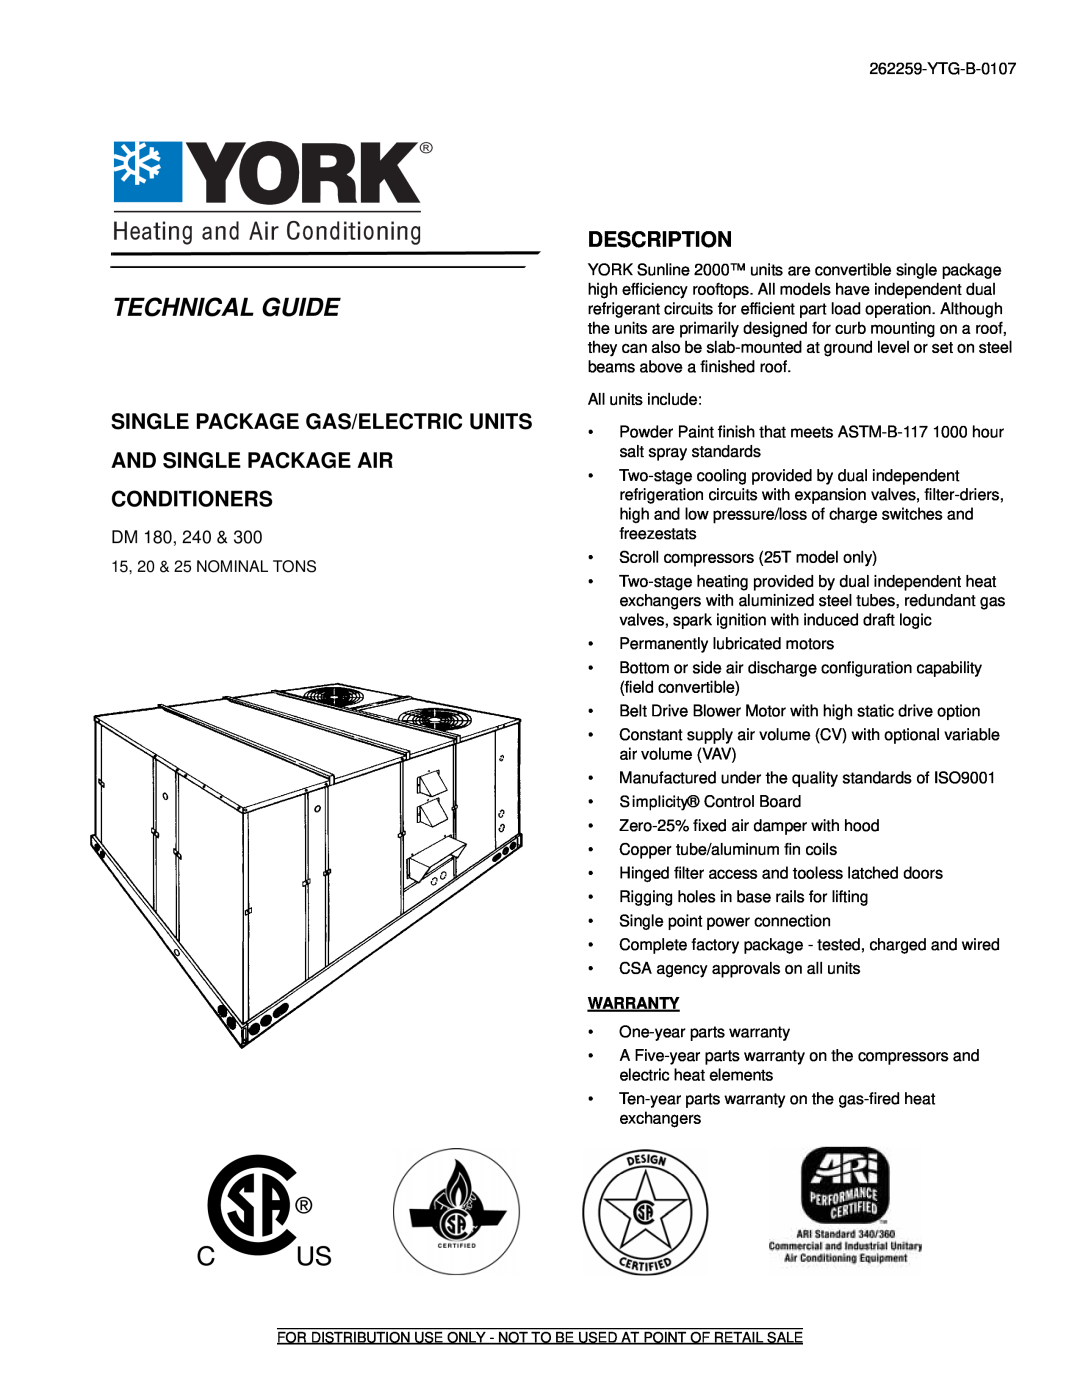 York DM 240 warranty Single Package Gas/Electric Units, And Single Package Air Conditioners, Description, Technical Guide 